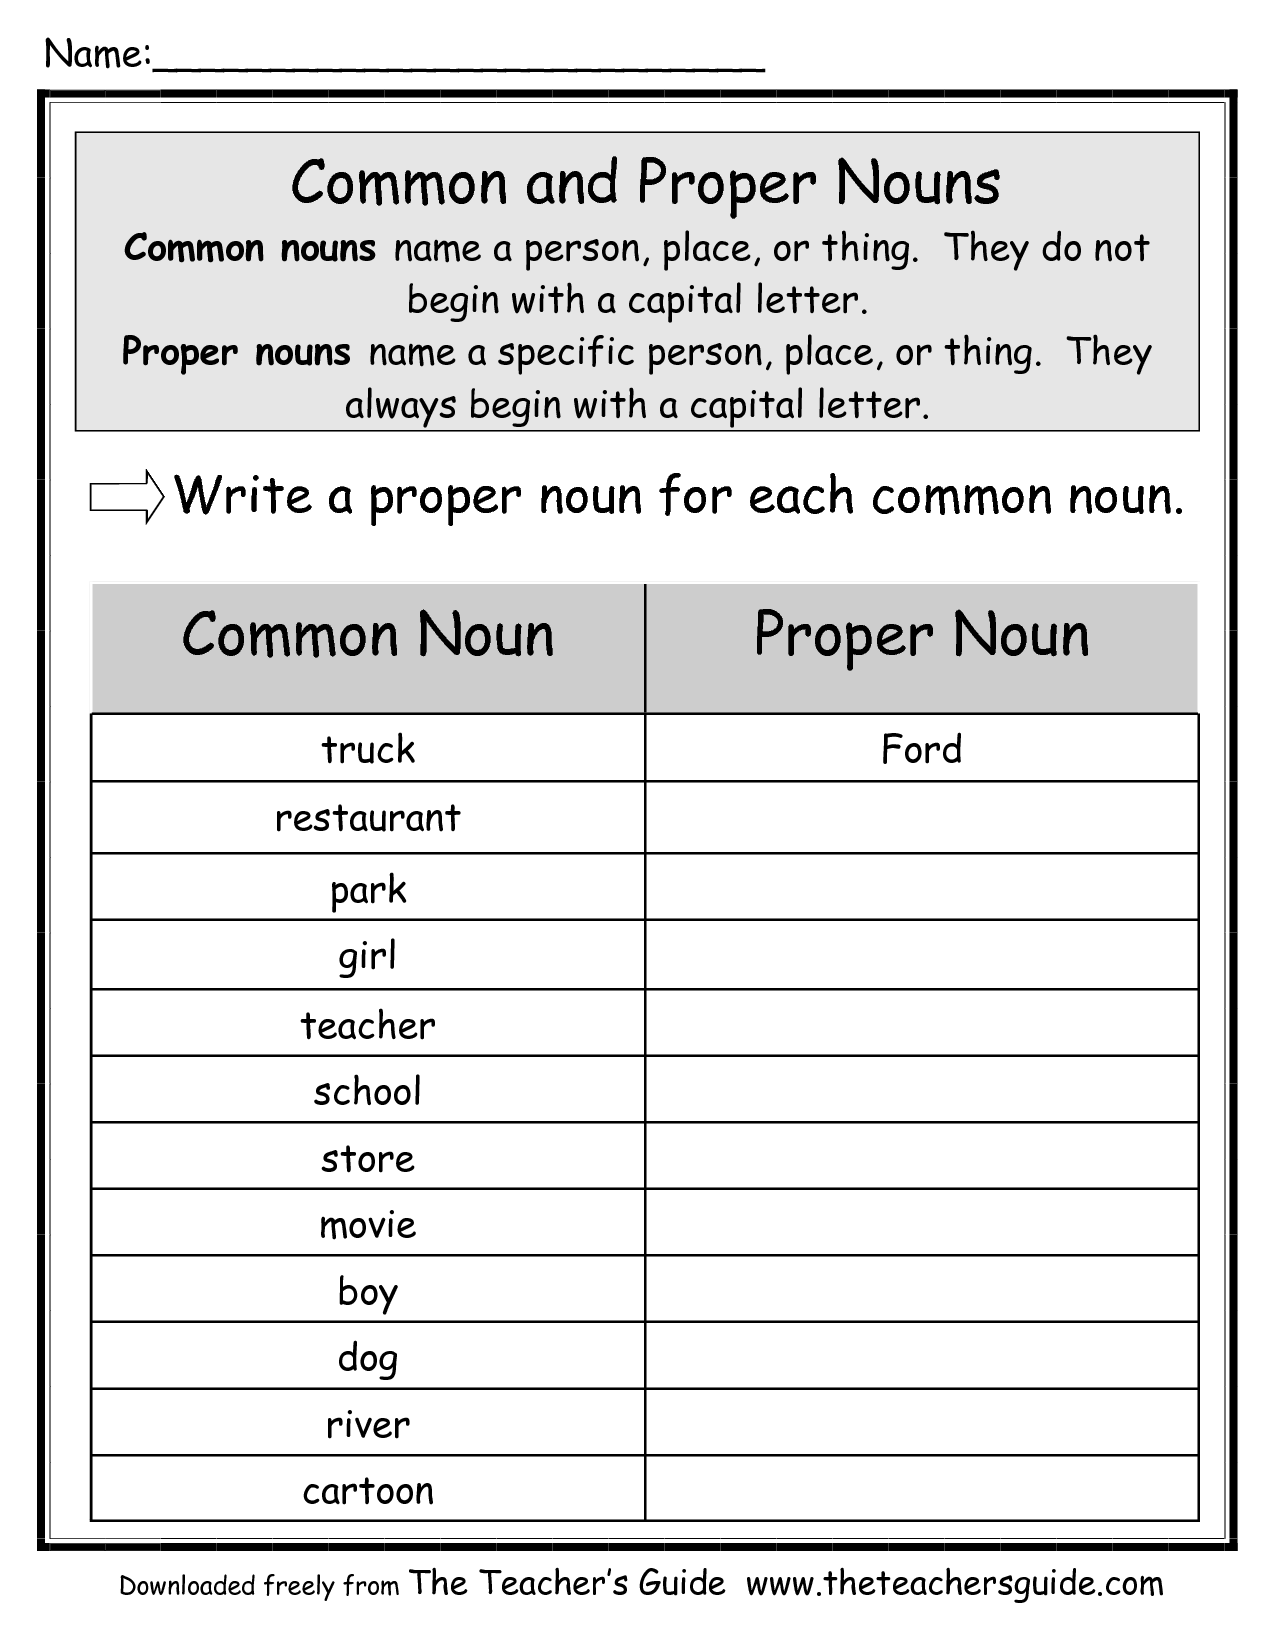 13-best-images-of-common-and-proper-nouns-worksheets-common-and-proper-noun-worksheet-first